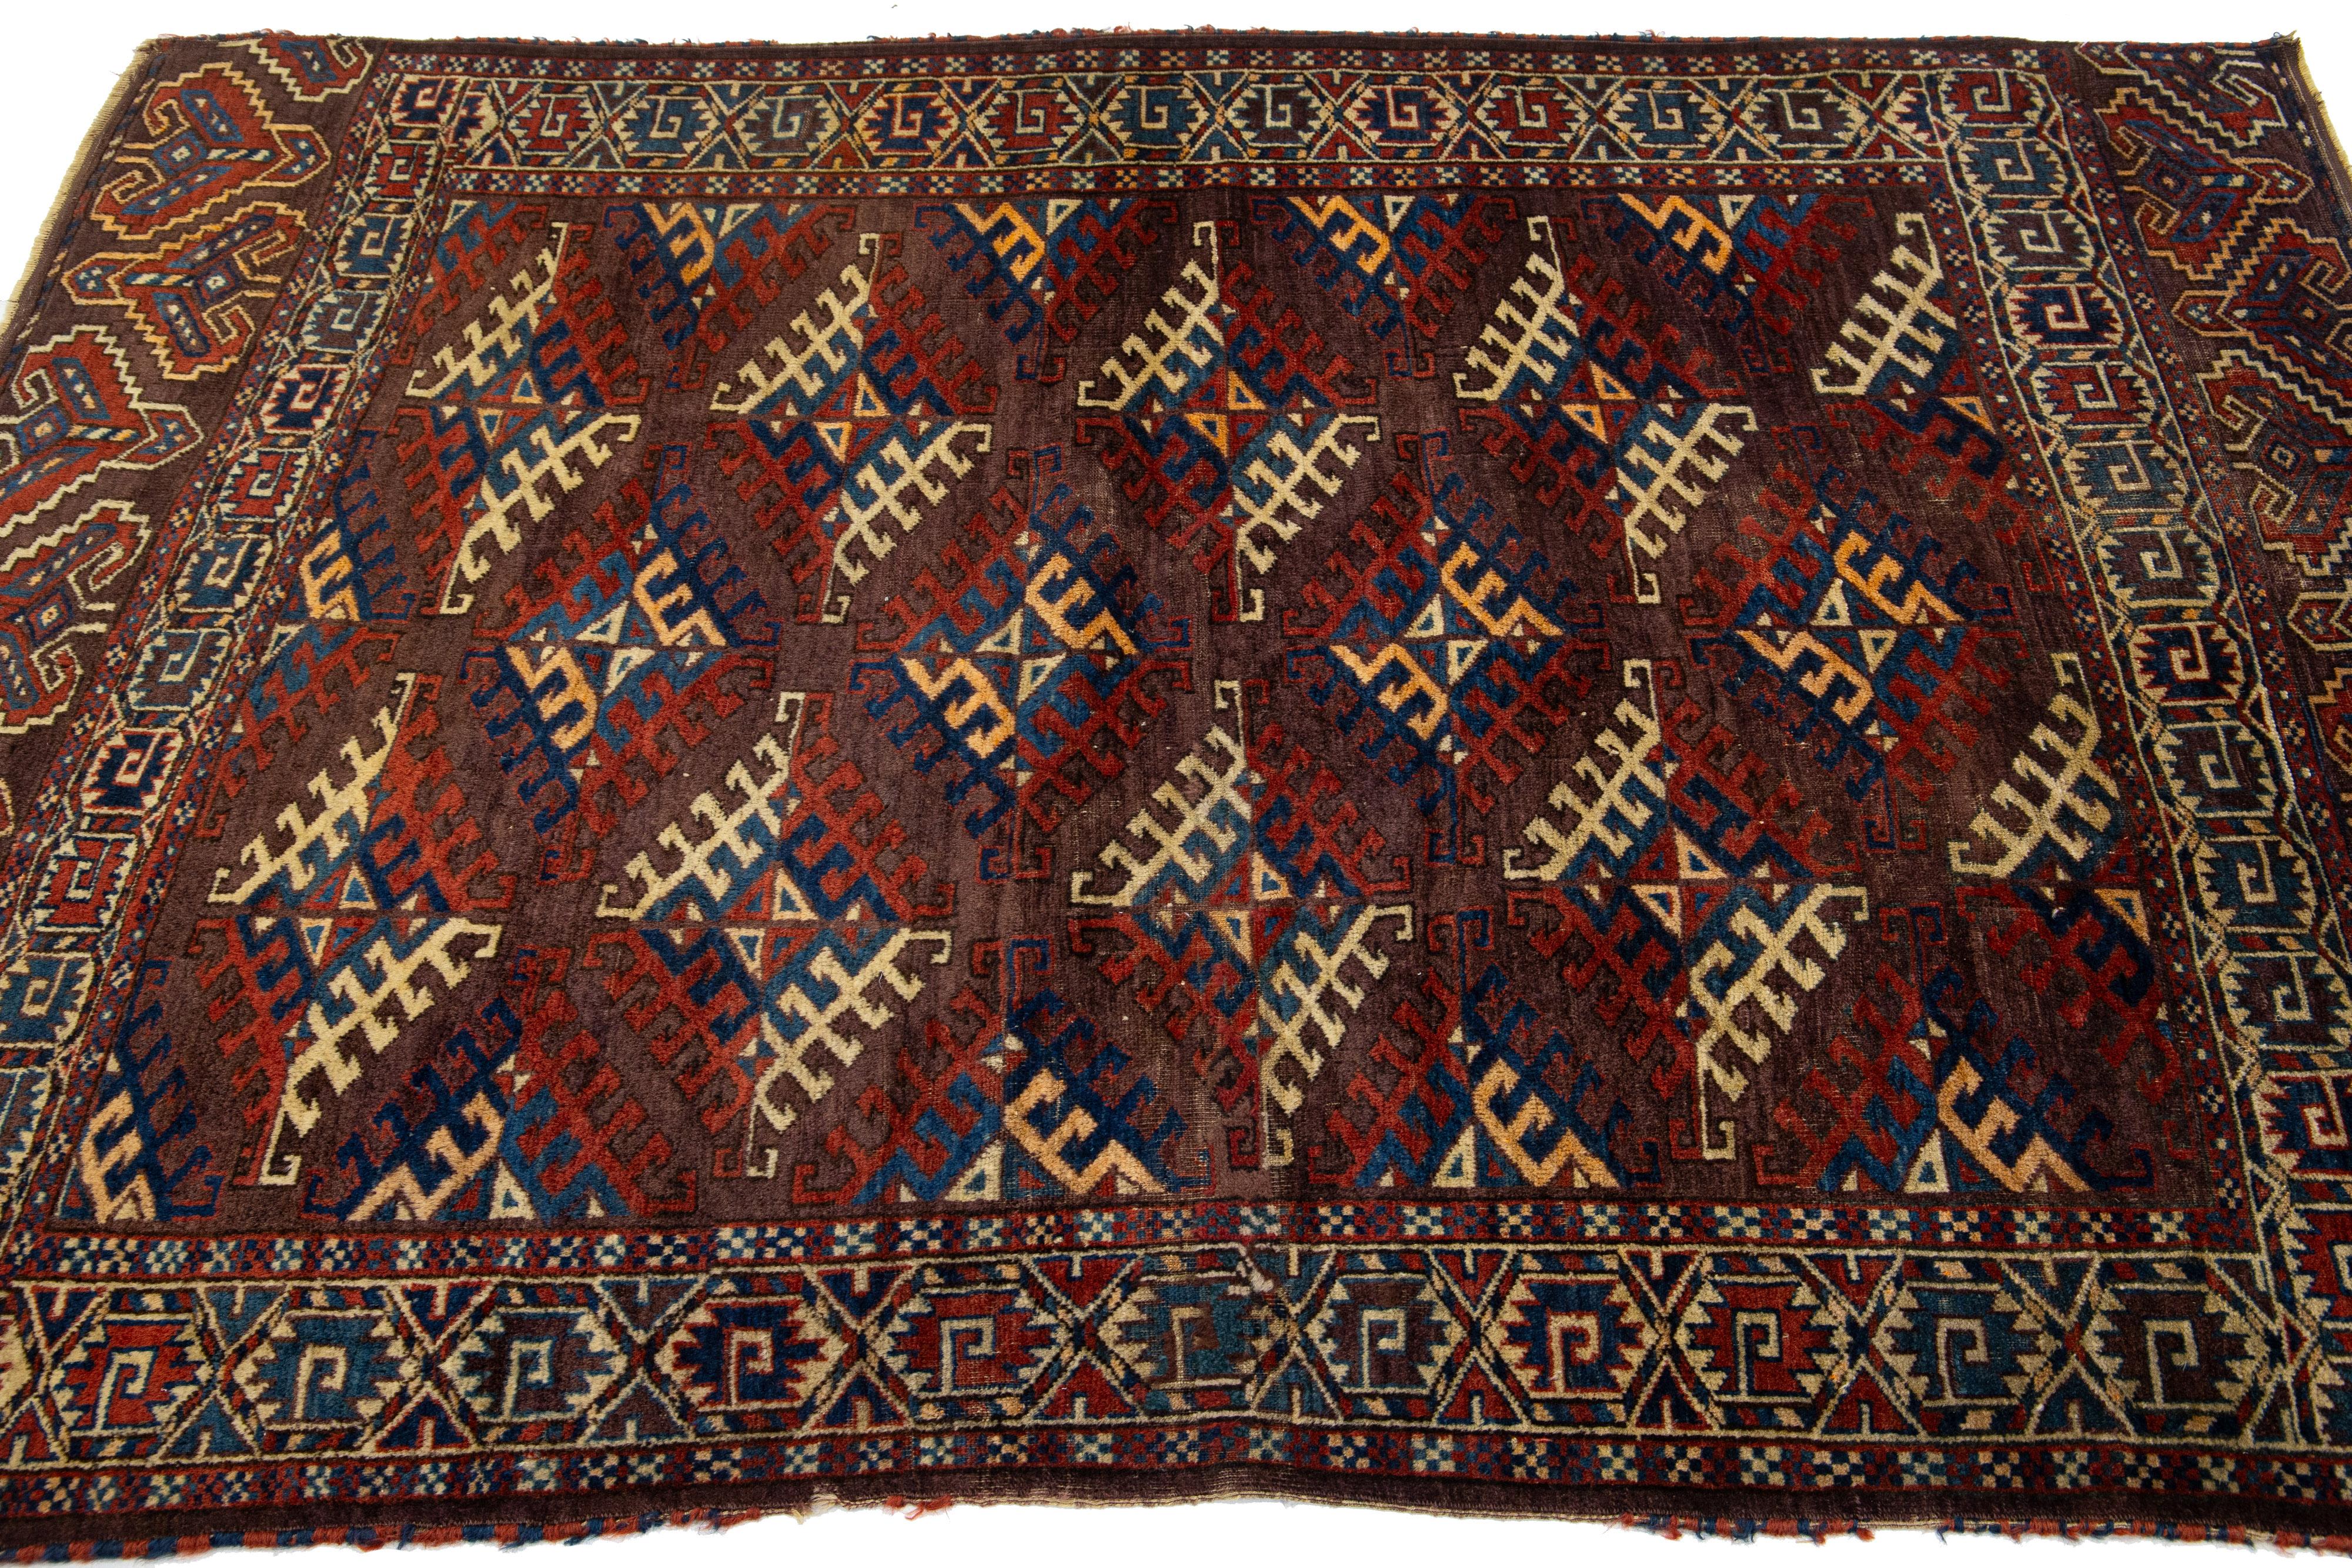 1890s Antique Geometric Wool Rug Afghan Turkmen In Brown In Excellent Condition For Sale In Norwalk, CT